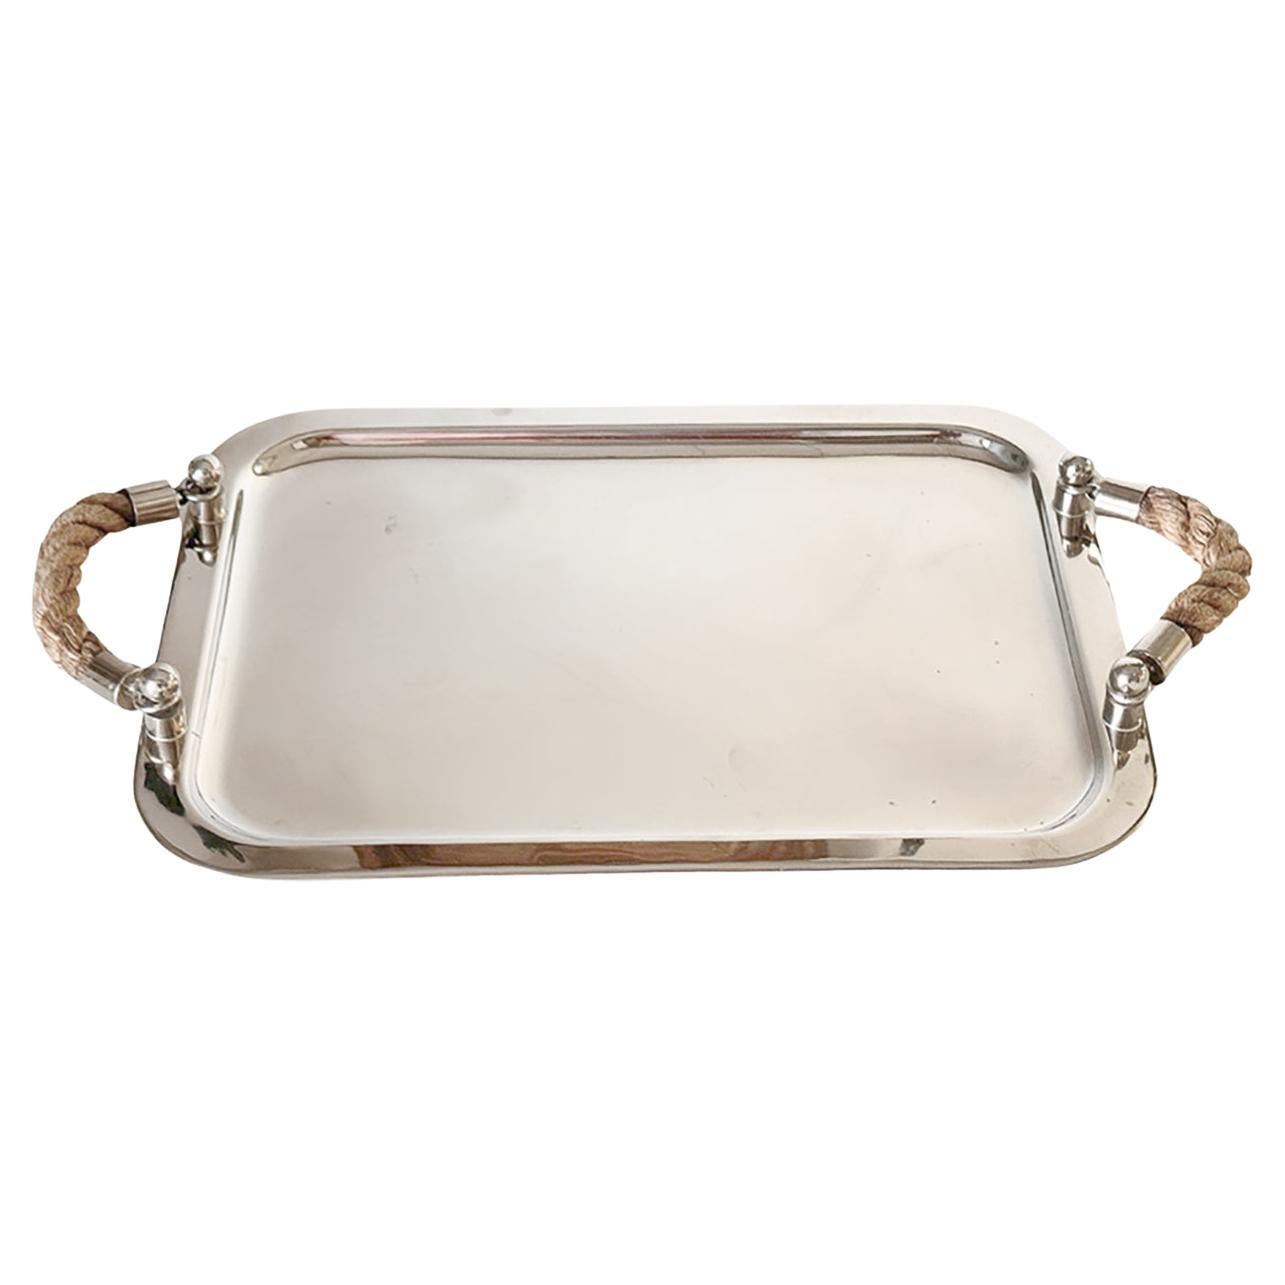 Yachting Serving Tray With Rope Handles High Quality Chrome Silver Color 1970